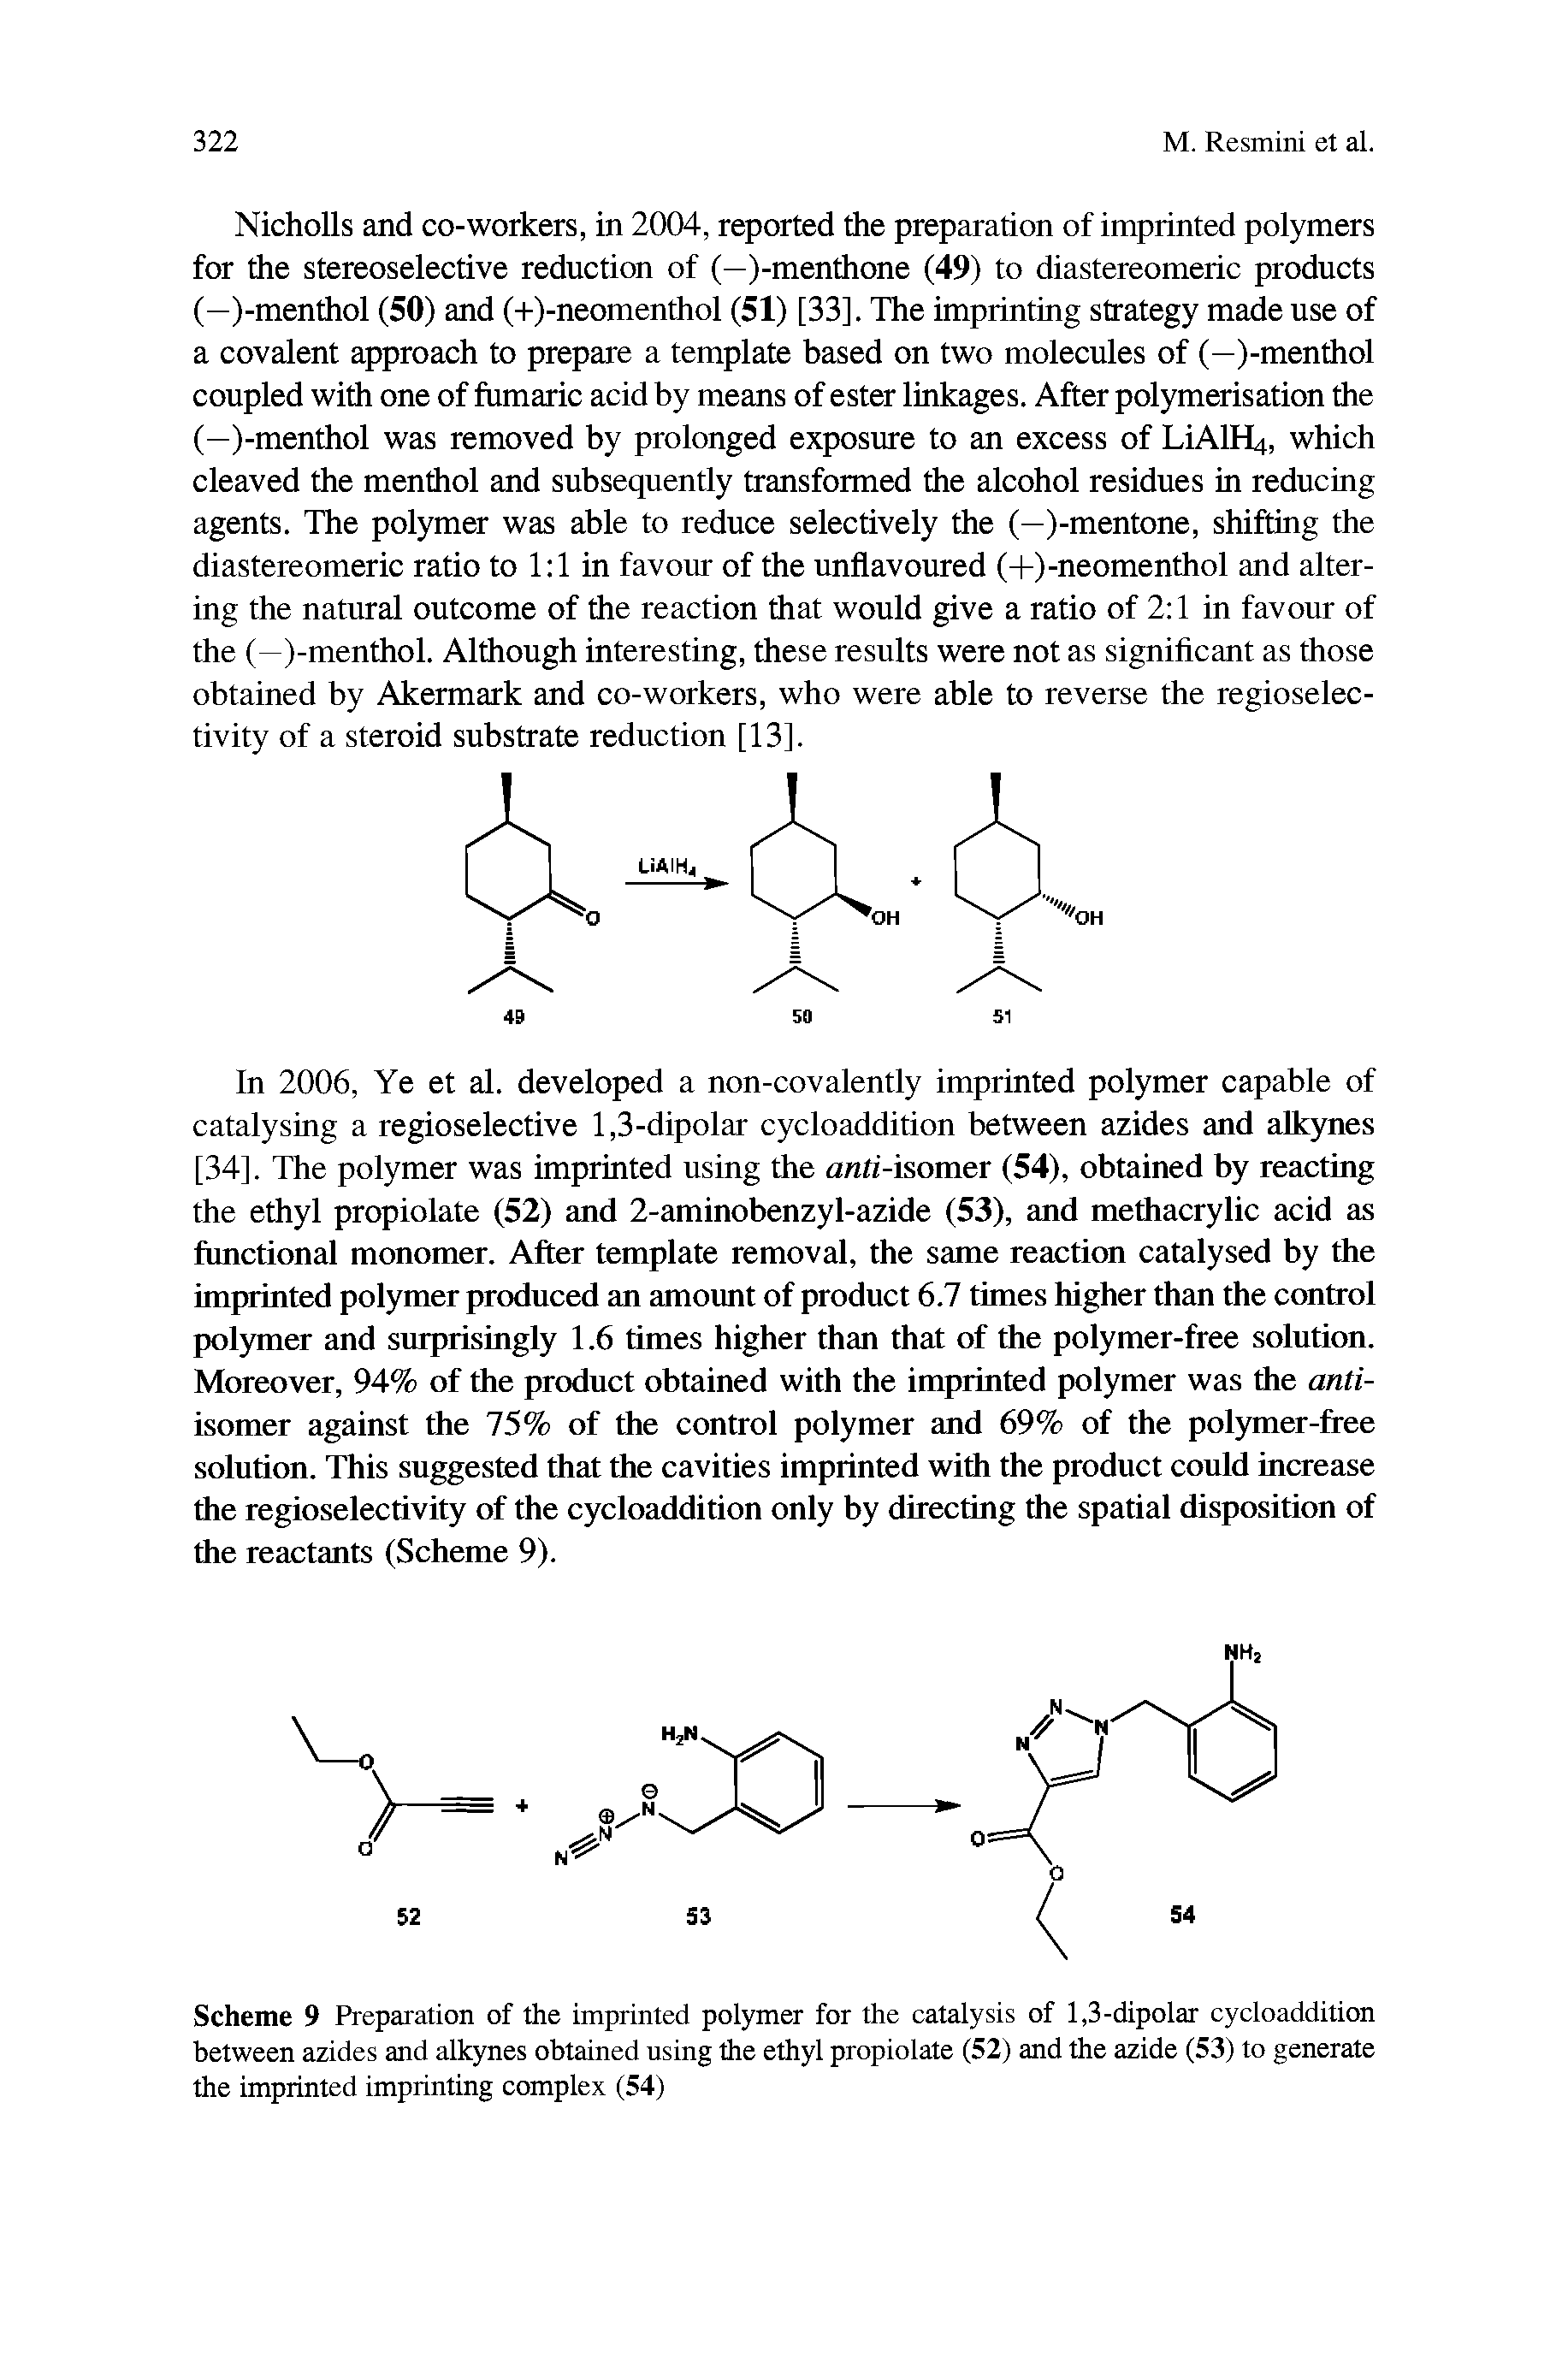 Scheme 9 Preparation of the imprinted polymer for the catalysis of 1,3-dipolar cycloaddition between azides and alkynes obtained using the ethyl propiolate (52) and the azide (53) to generate the imprinted imprinting complex (54)...